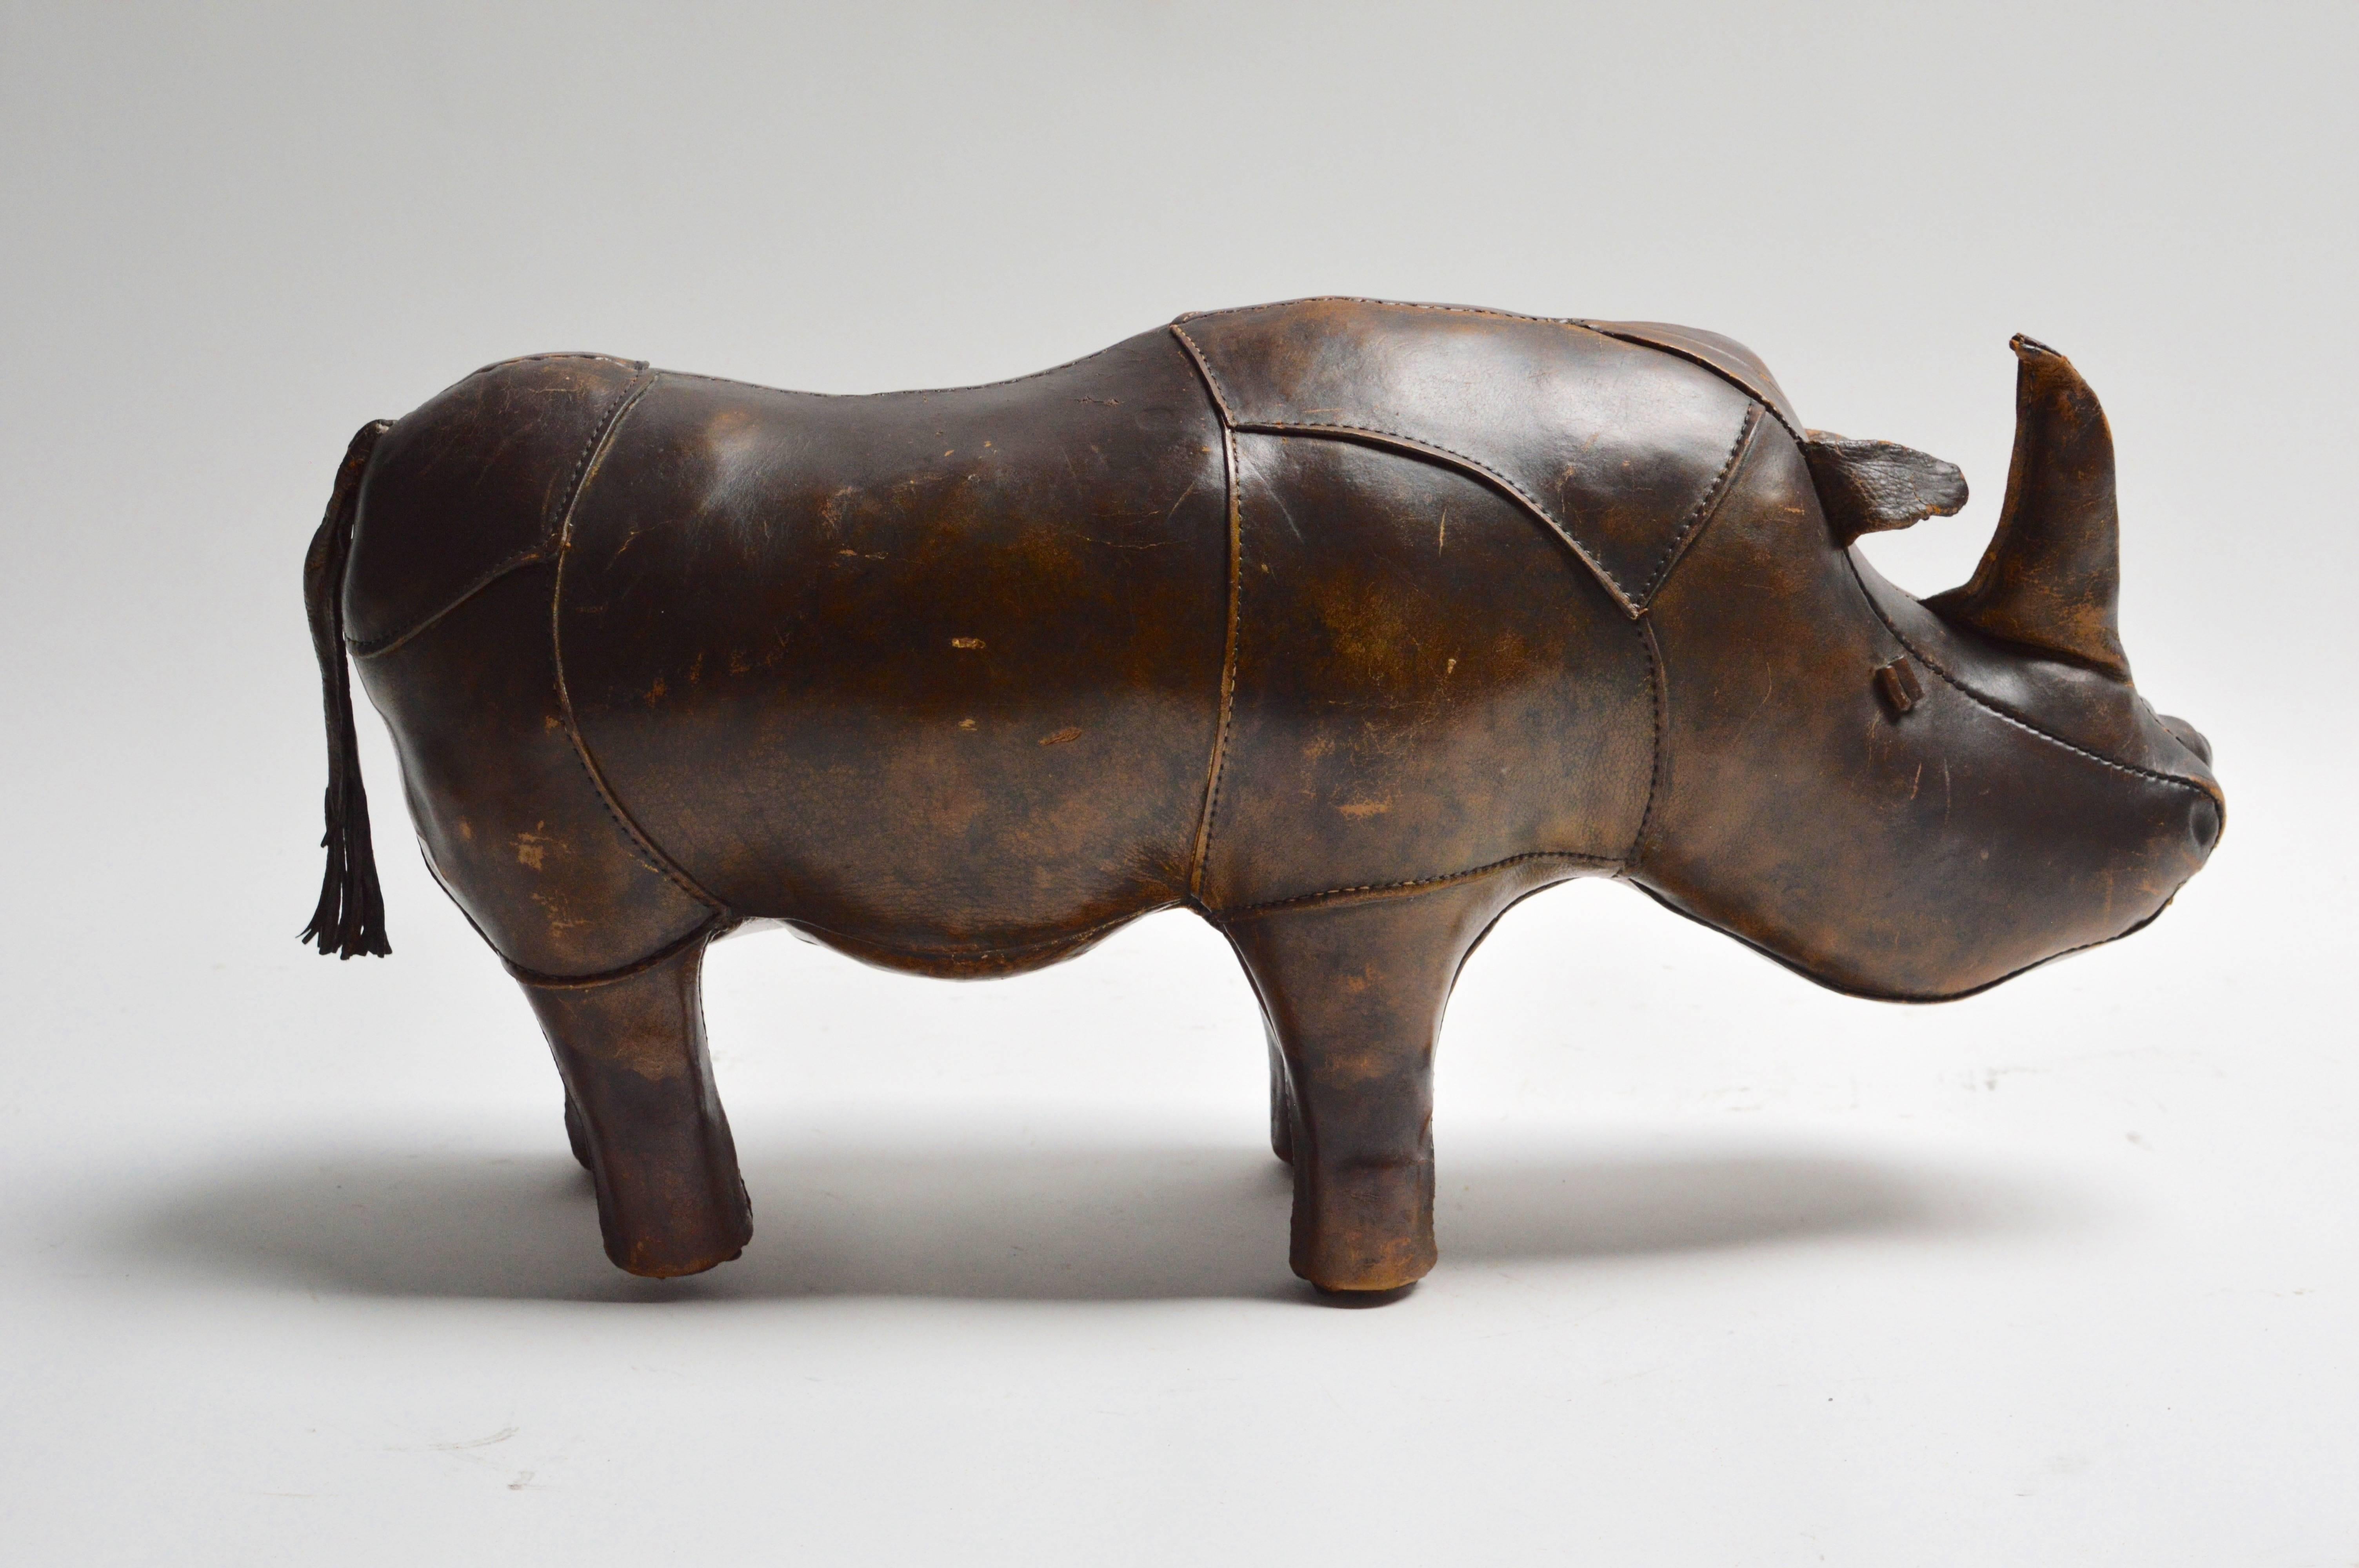 Handsome leather rhinoceros by Omersa. Very sturdy stool or footstool. Also a great sculptural object. Beautiful age and patina to brown leather. Excellent vintage condition.